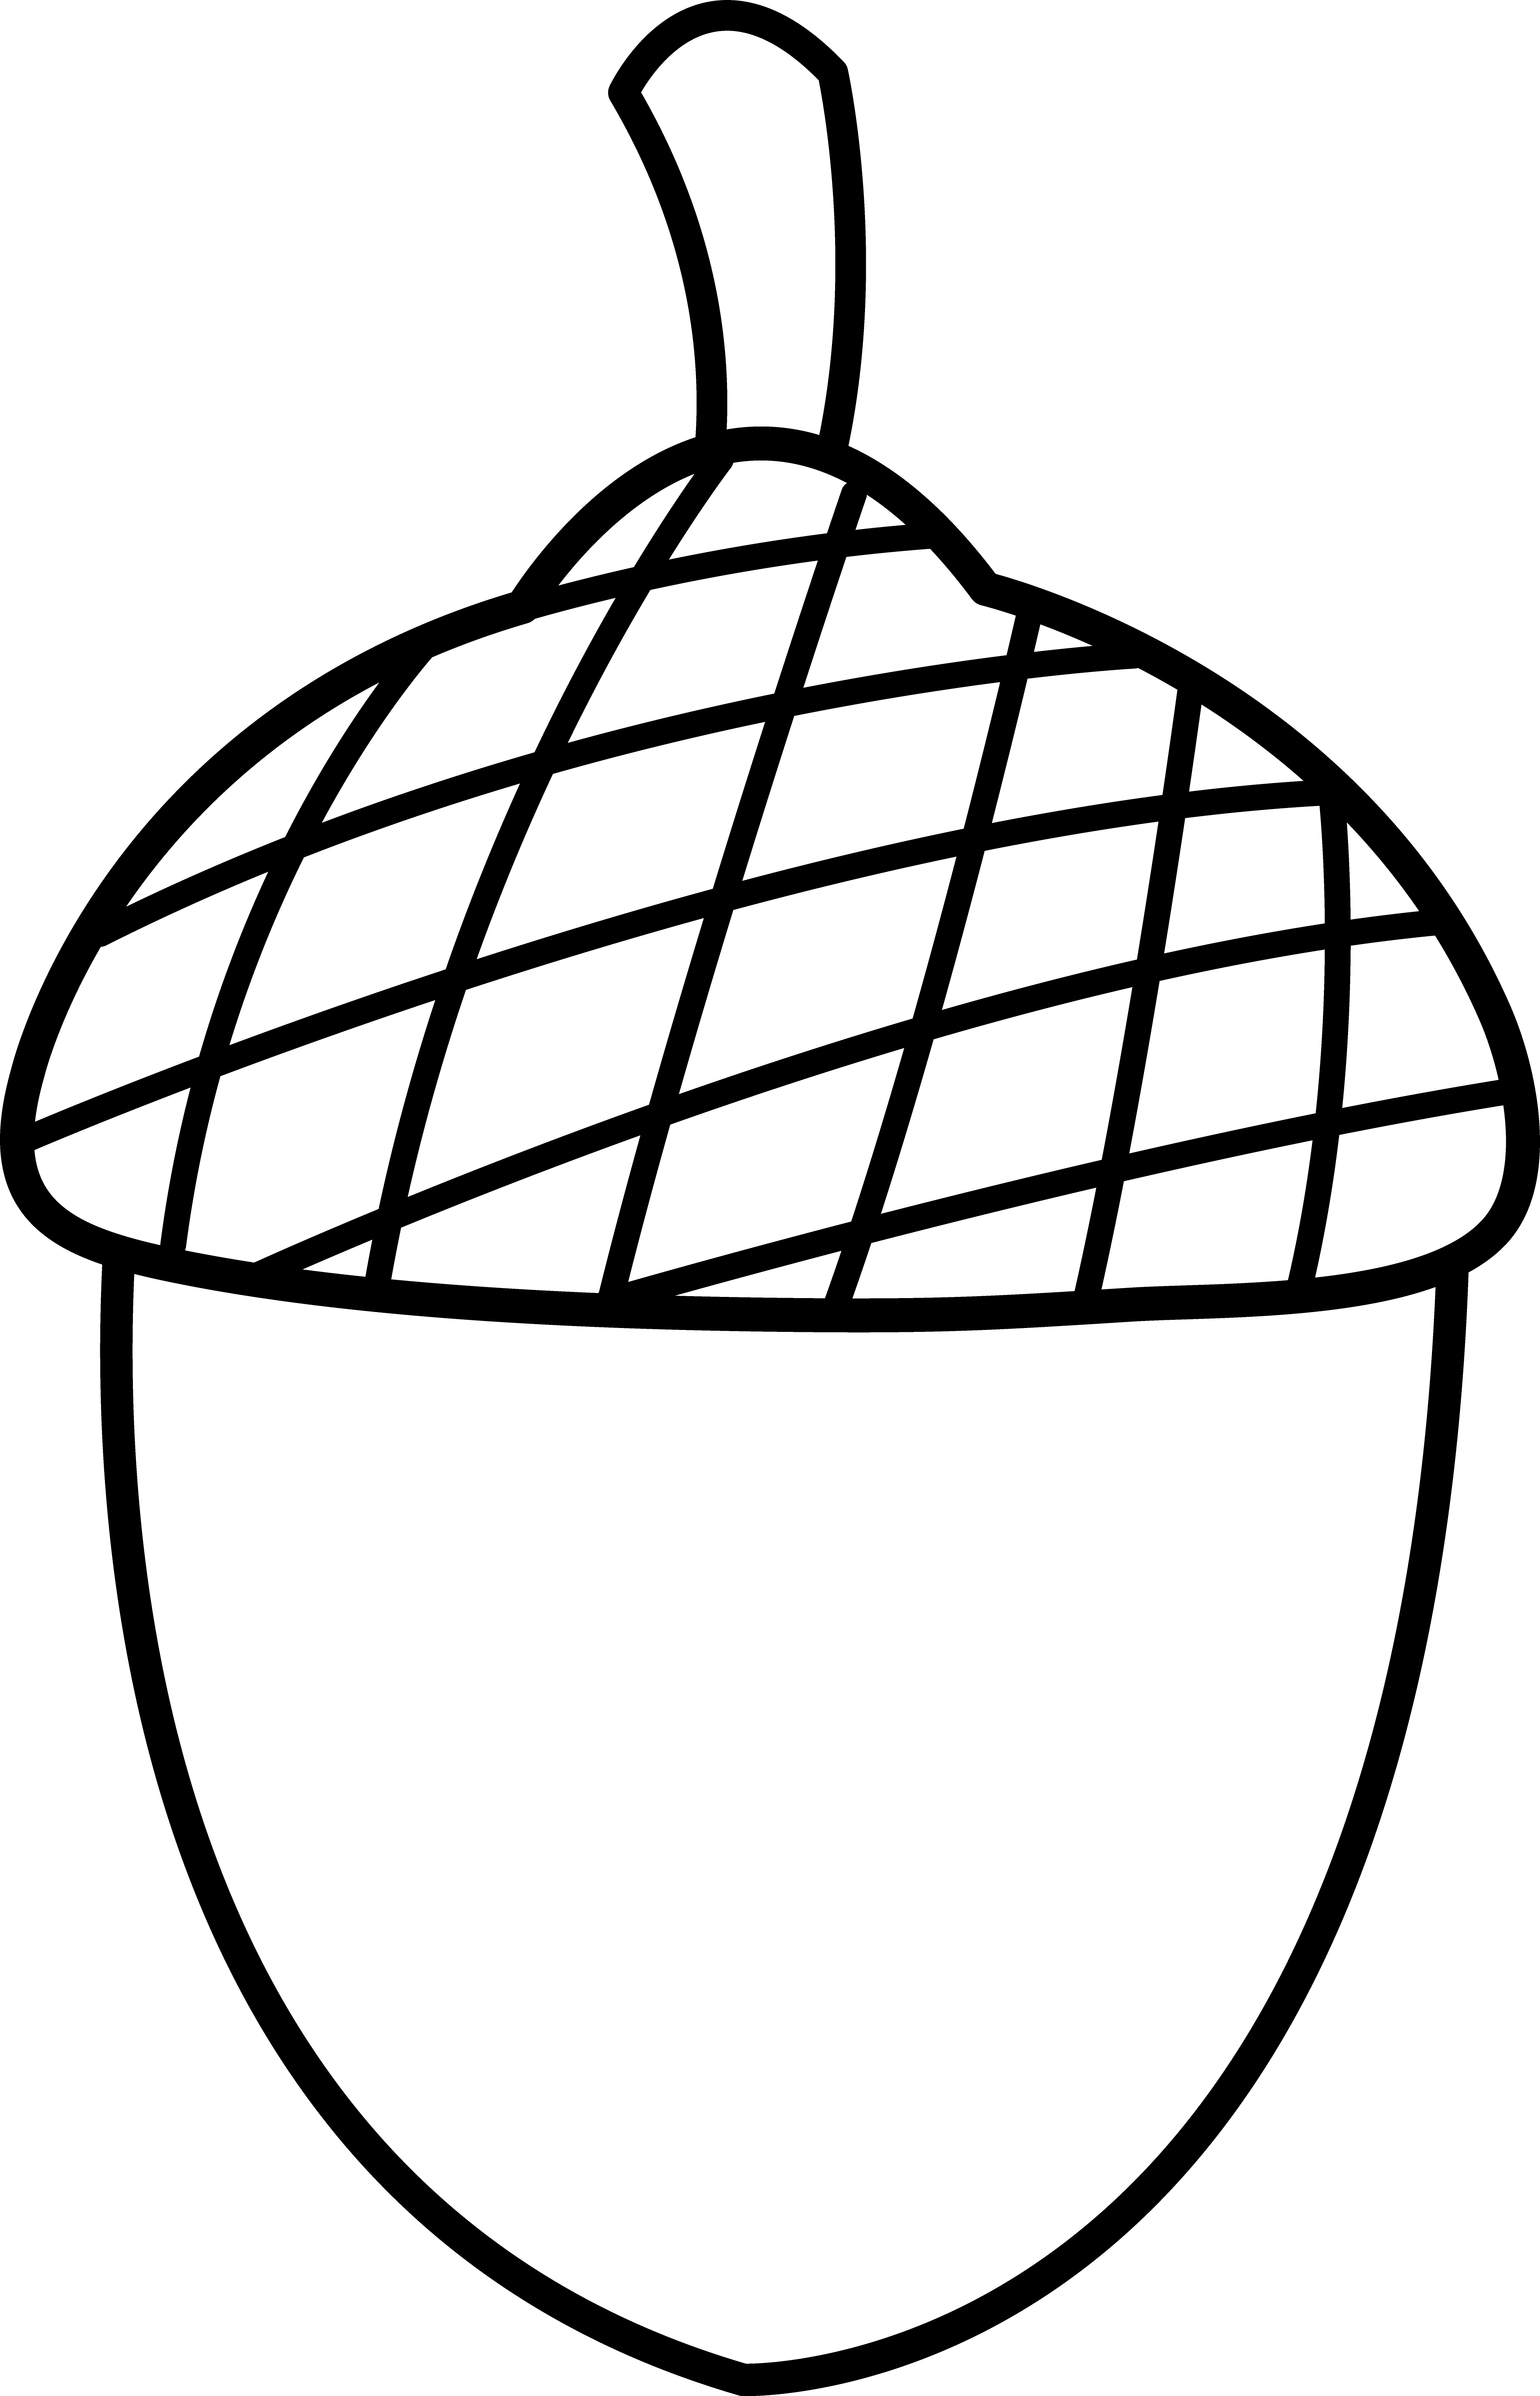 Acorn Clipart Black And White | Clipart library - Free Clipart Images